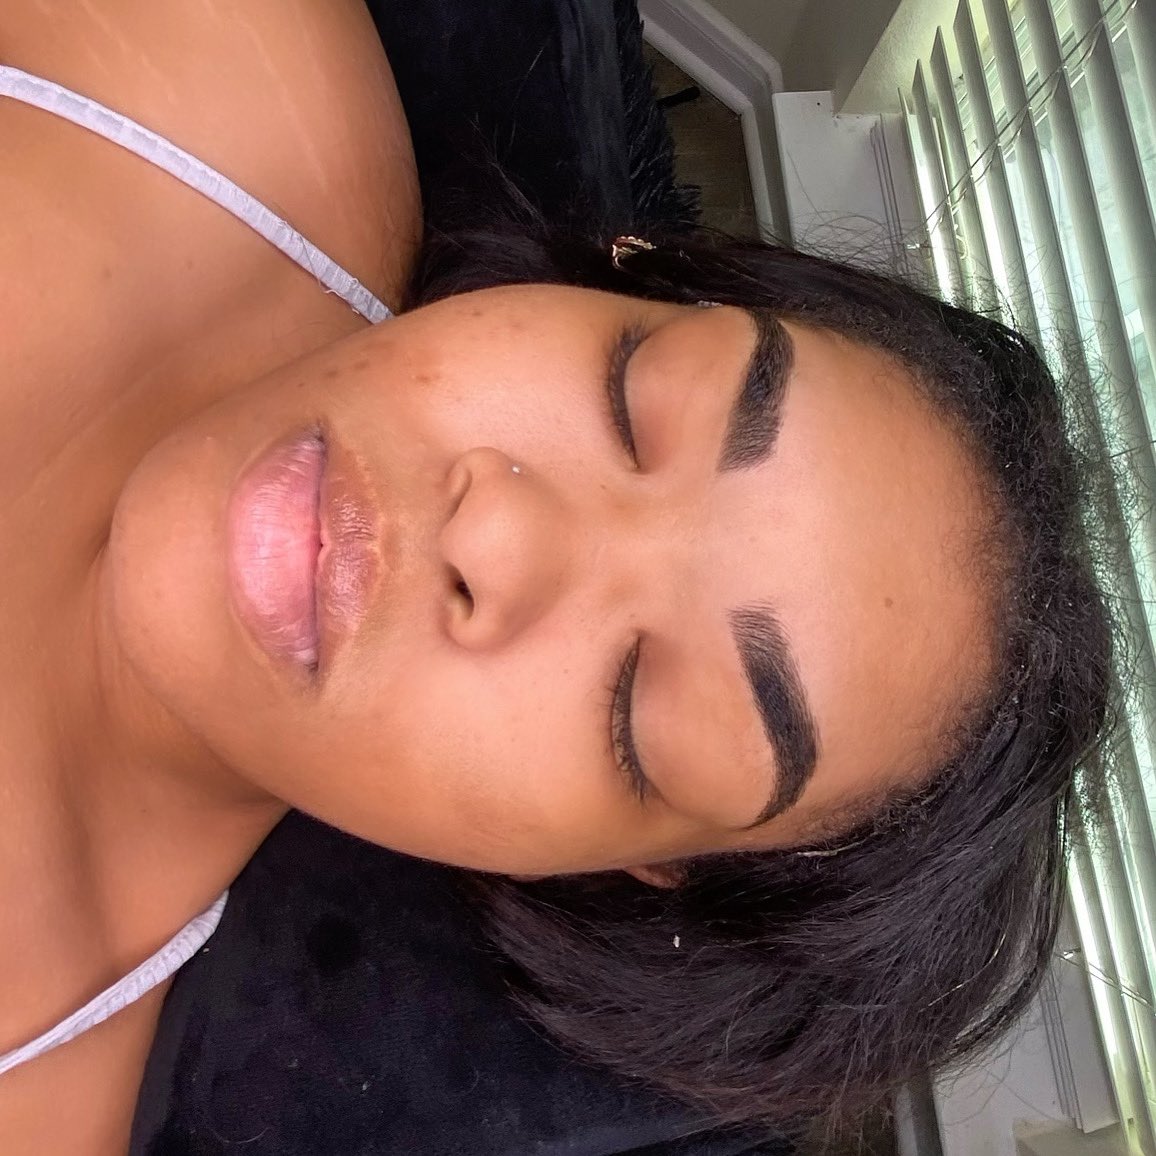 Brows can make or break a face💗 and our brows last 2-3 weeks! Come lay down on my table before school🥰 #pvamu & #TSU students receive $10 OFF ‼️

#pvamu24 #pvamu27 #WhosWhoPVAMU #tsu24